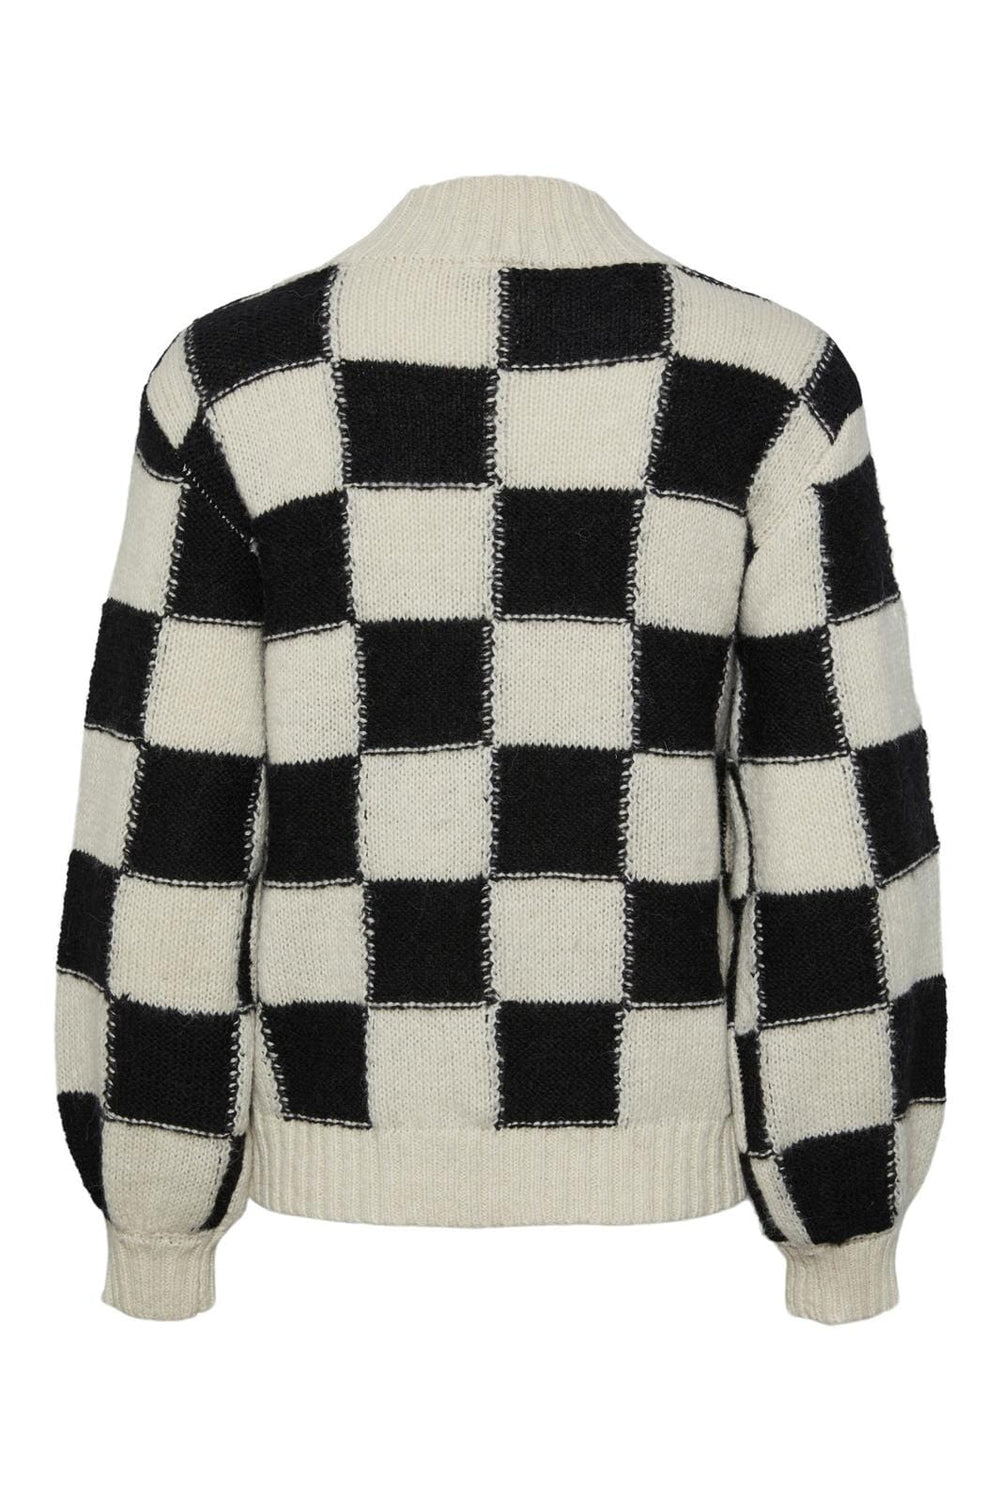 Y.A.S, Yaschess Ls Knit Pullover S., Black STAR WHITE